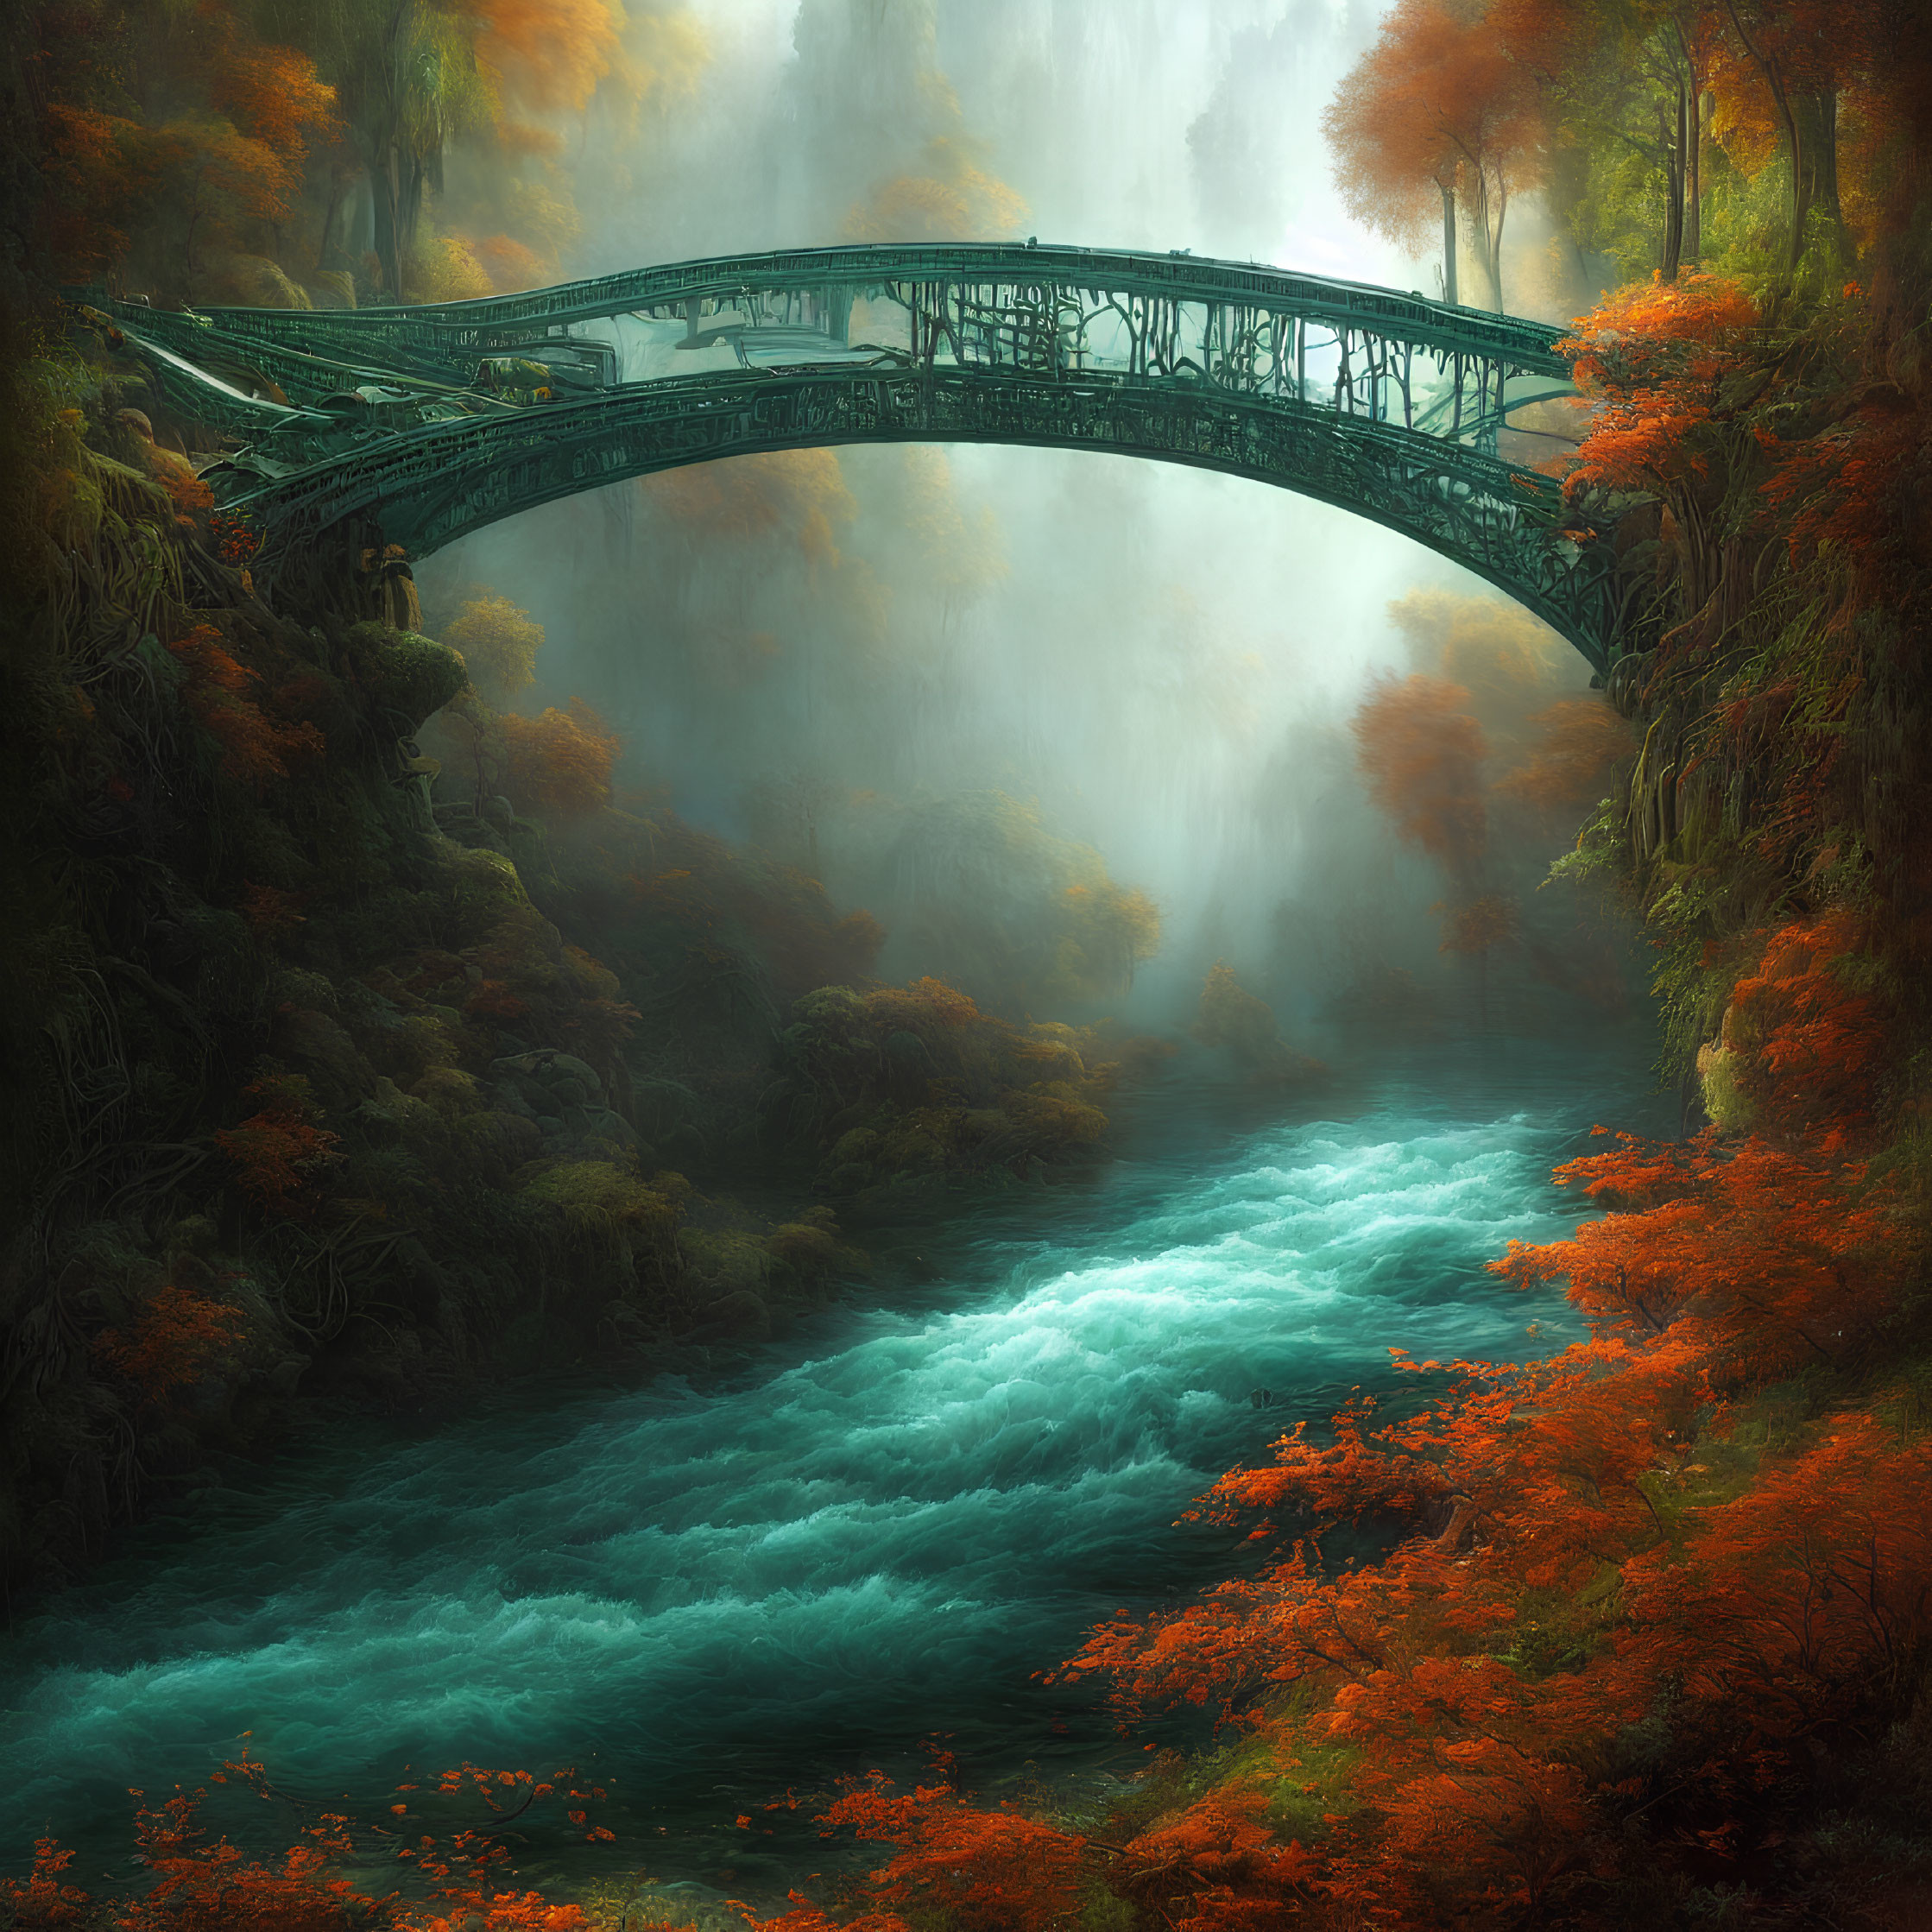 Enchanting forest scene with misty river and vintage green arched bridge